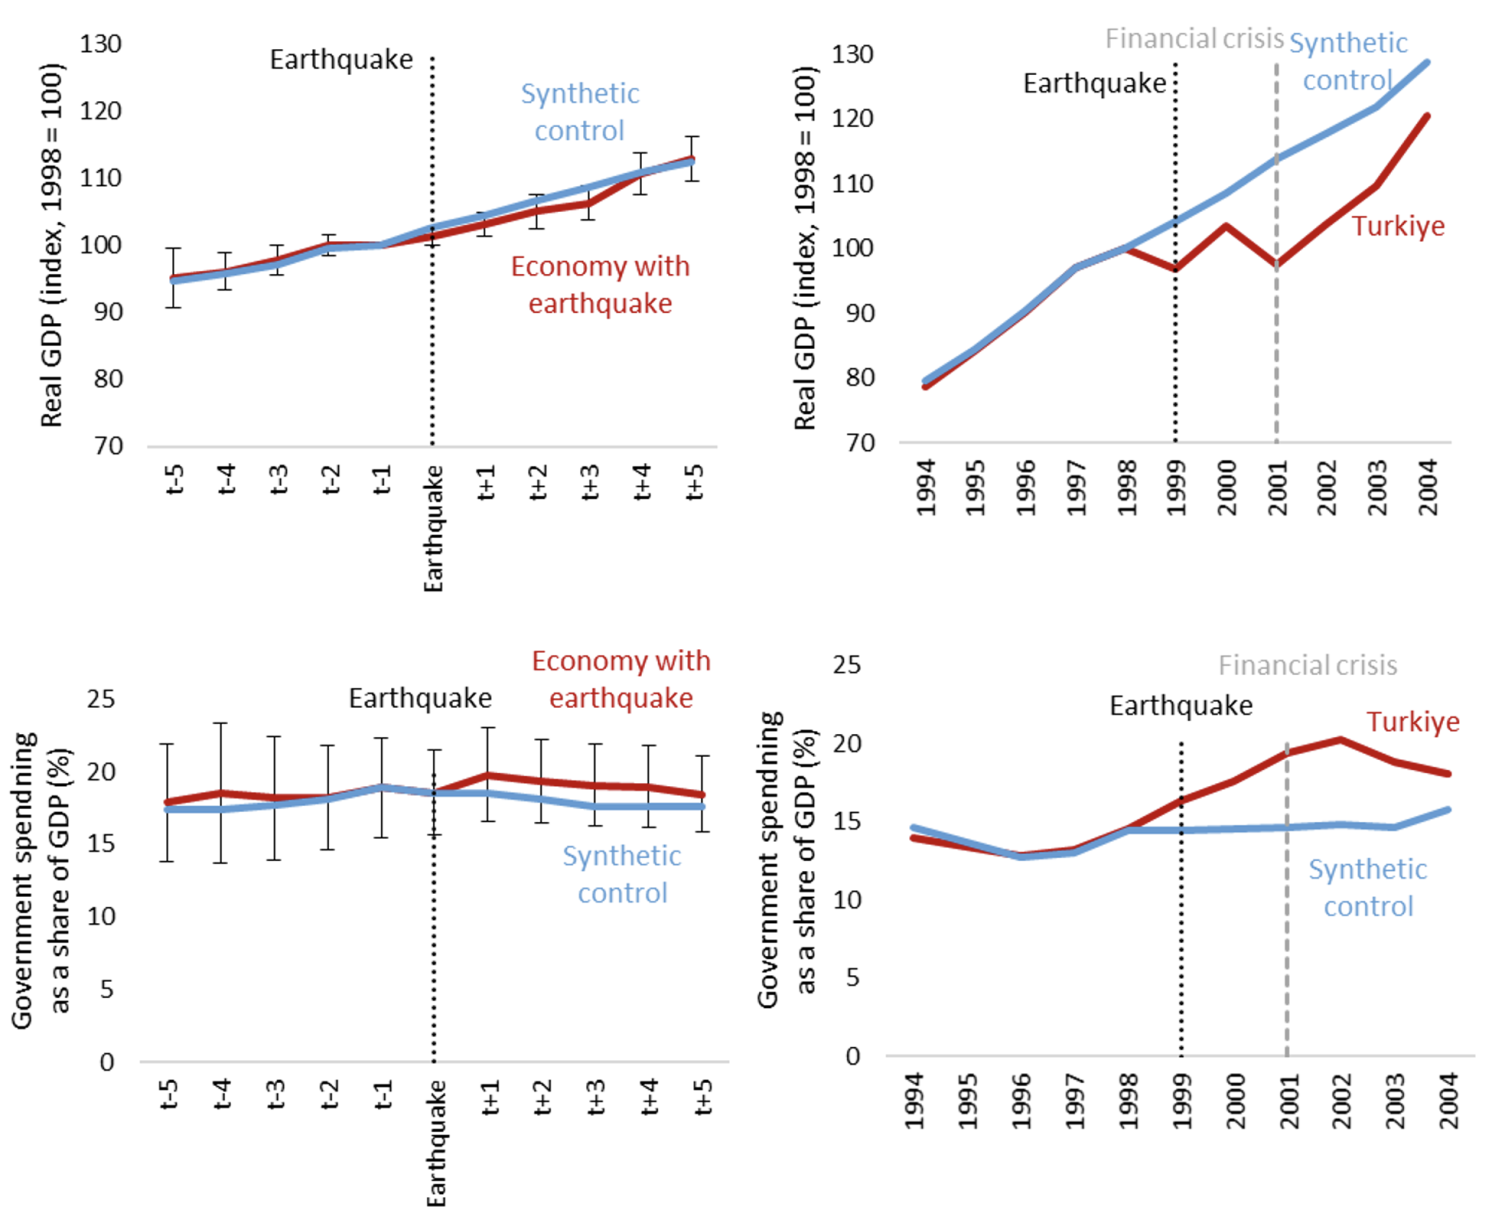 Figure 1 Estimates of the impact of earthquakes on GDP and government spending